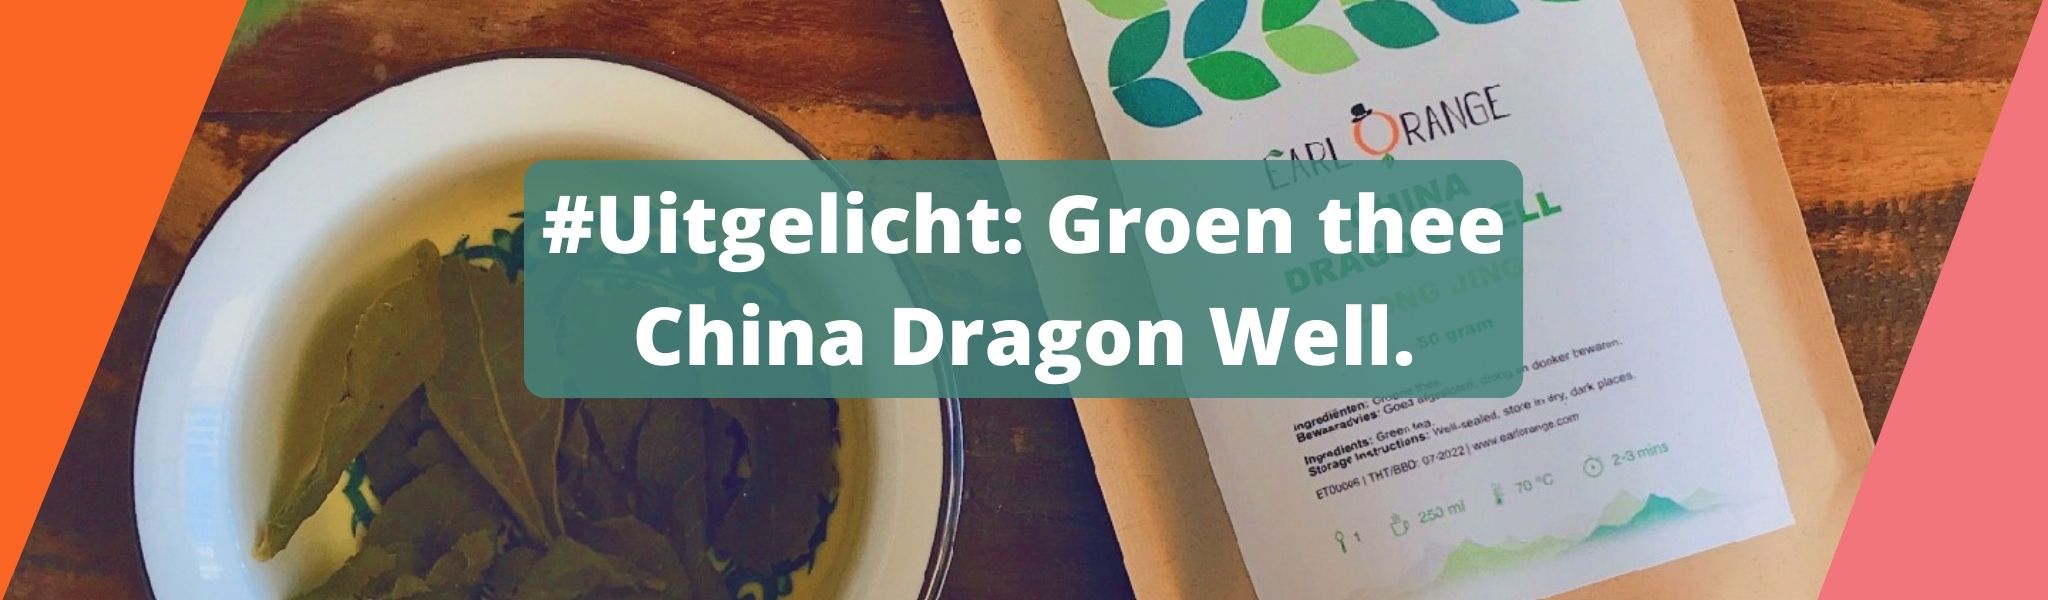 Lees hier alles over de groene thee China Dragon Well